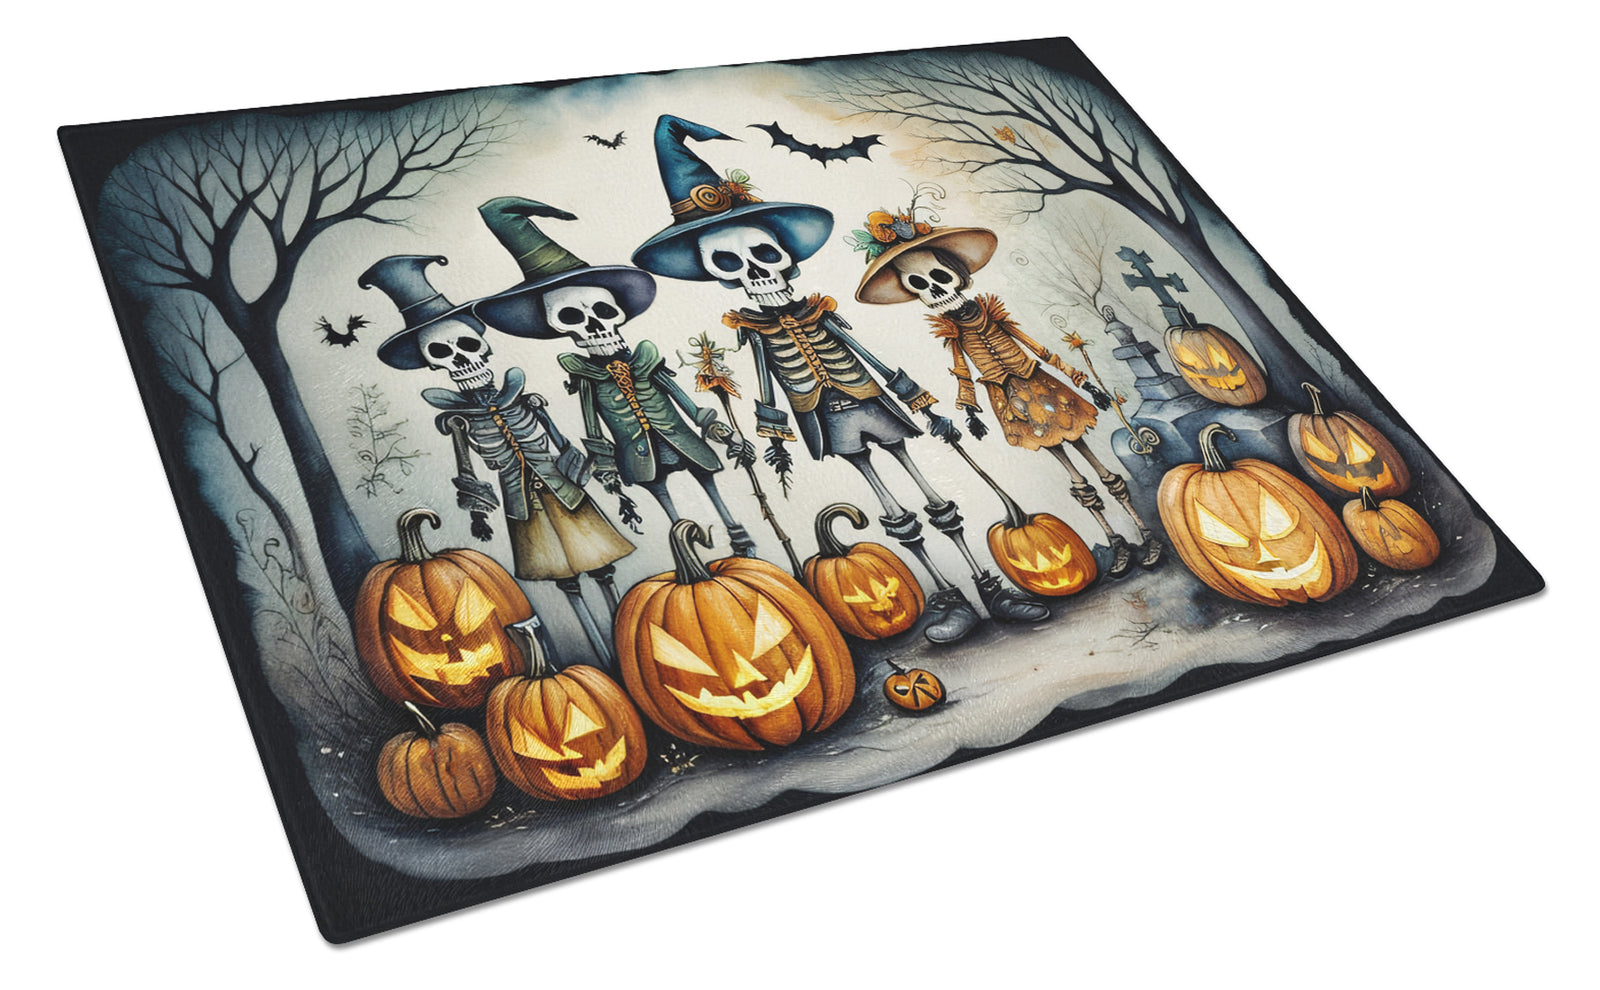 Buy this Calacas Skeletons Spooky Halloween Glass Cutting Board Large